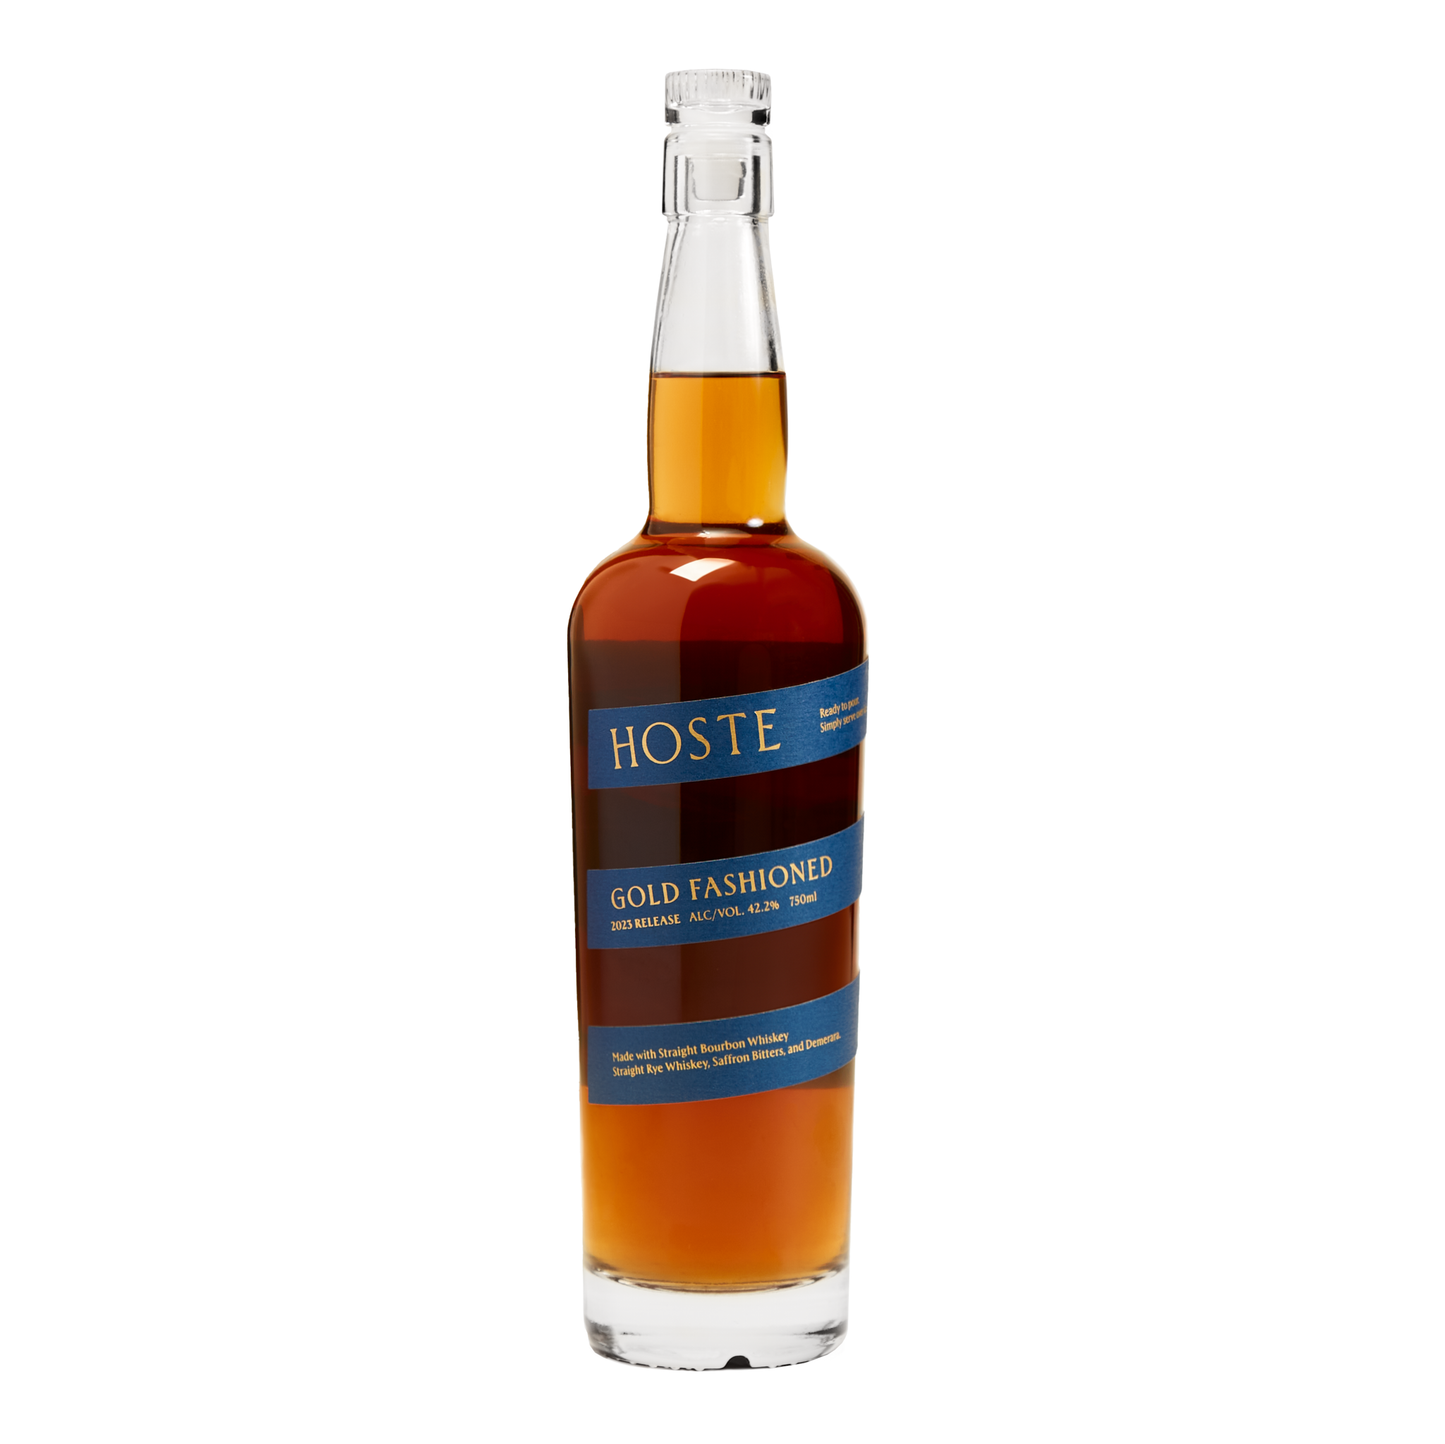 Hoste Gold Fashioned